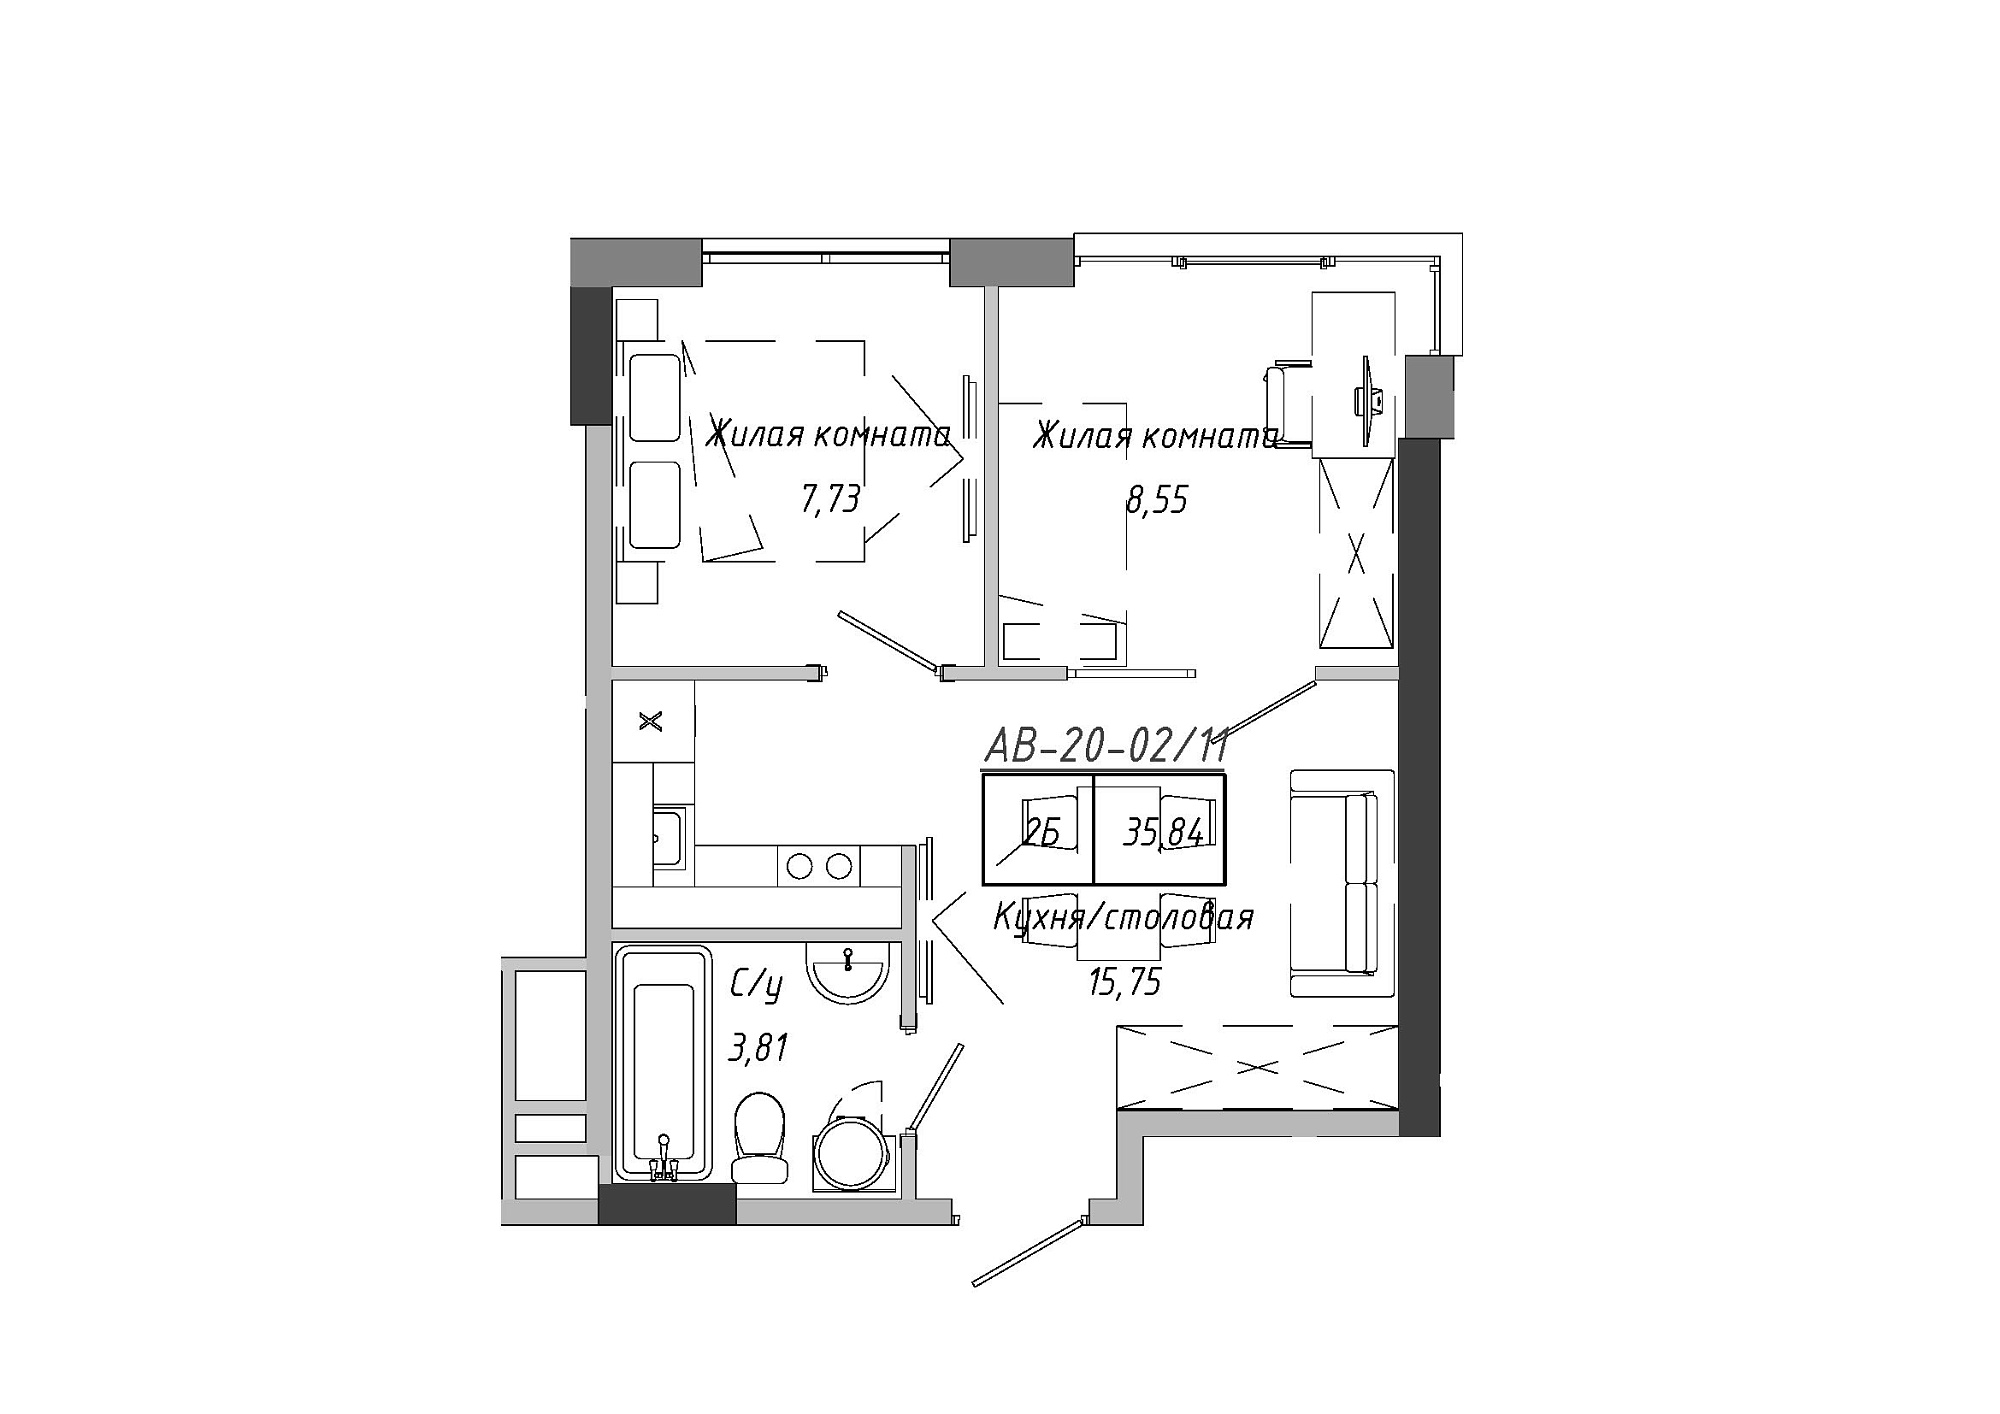 Planning 2-rm flats area 36.12m2, AB-20-02/00011.